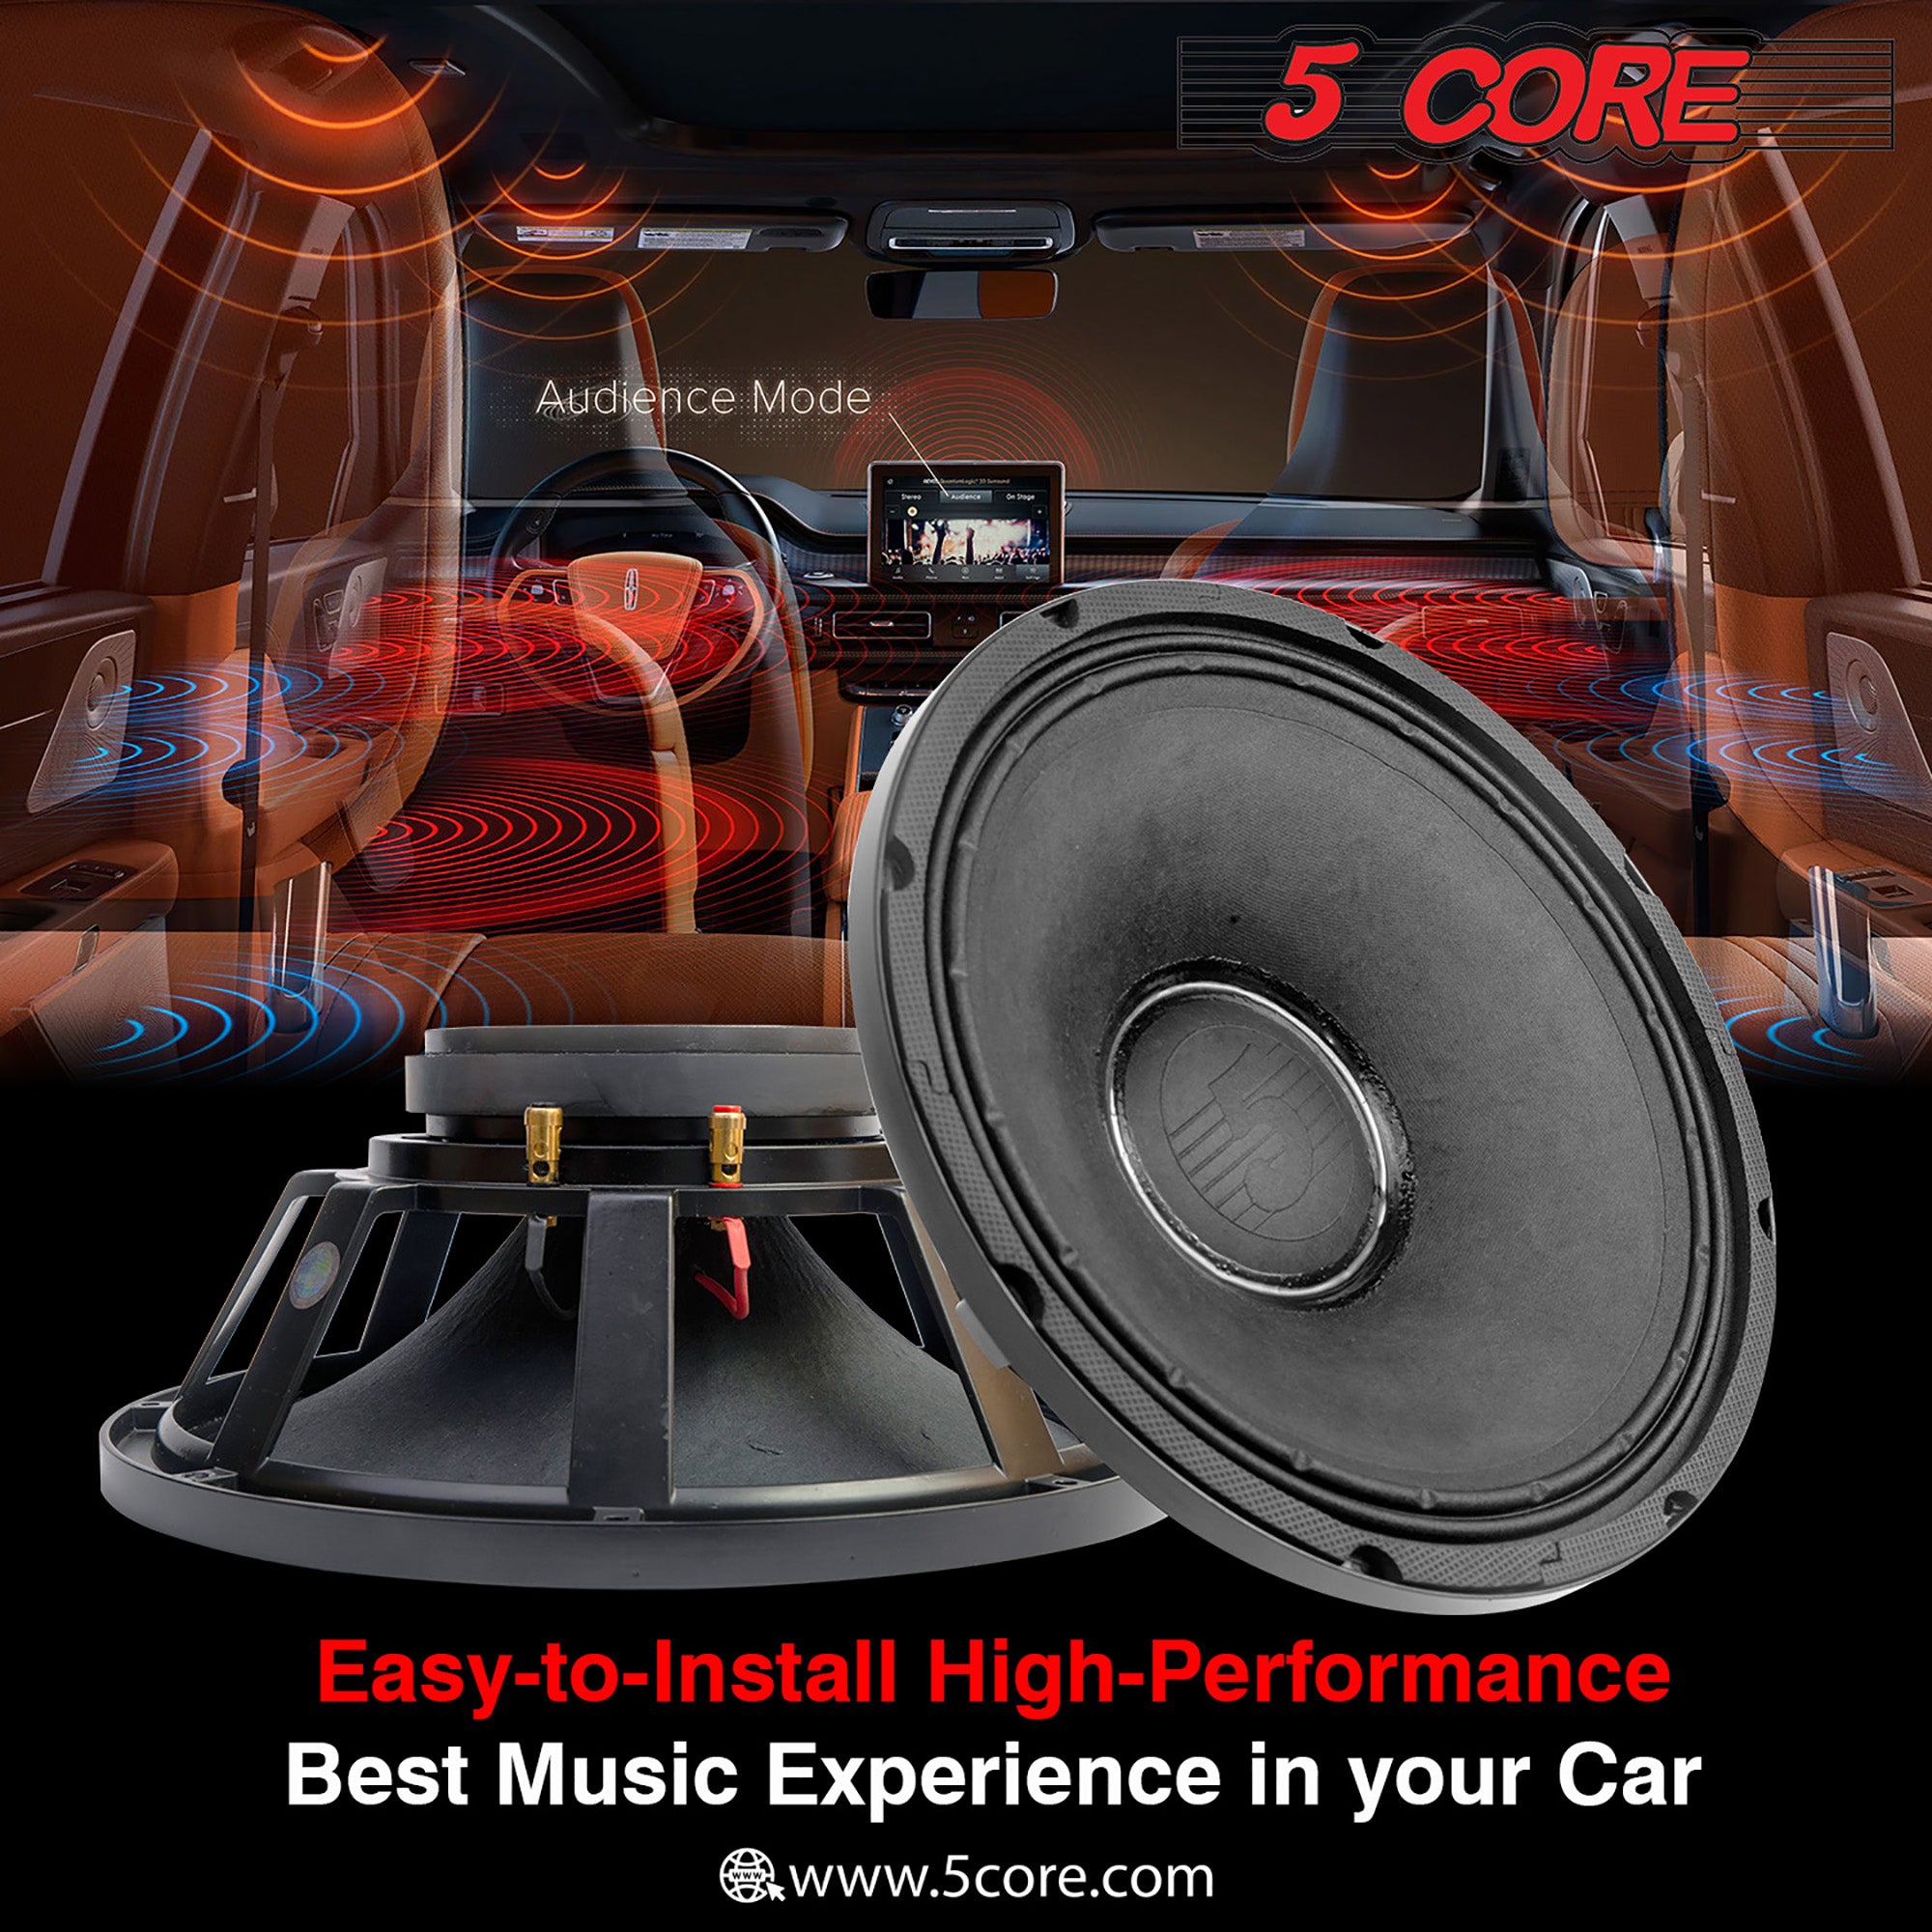 car audio subwoofers come with an easy installation procedure